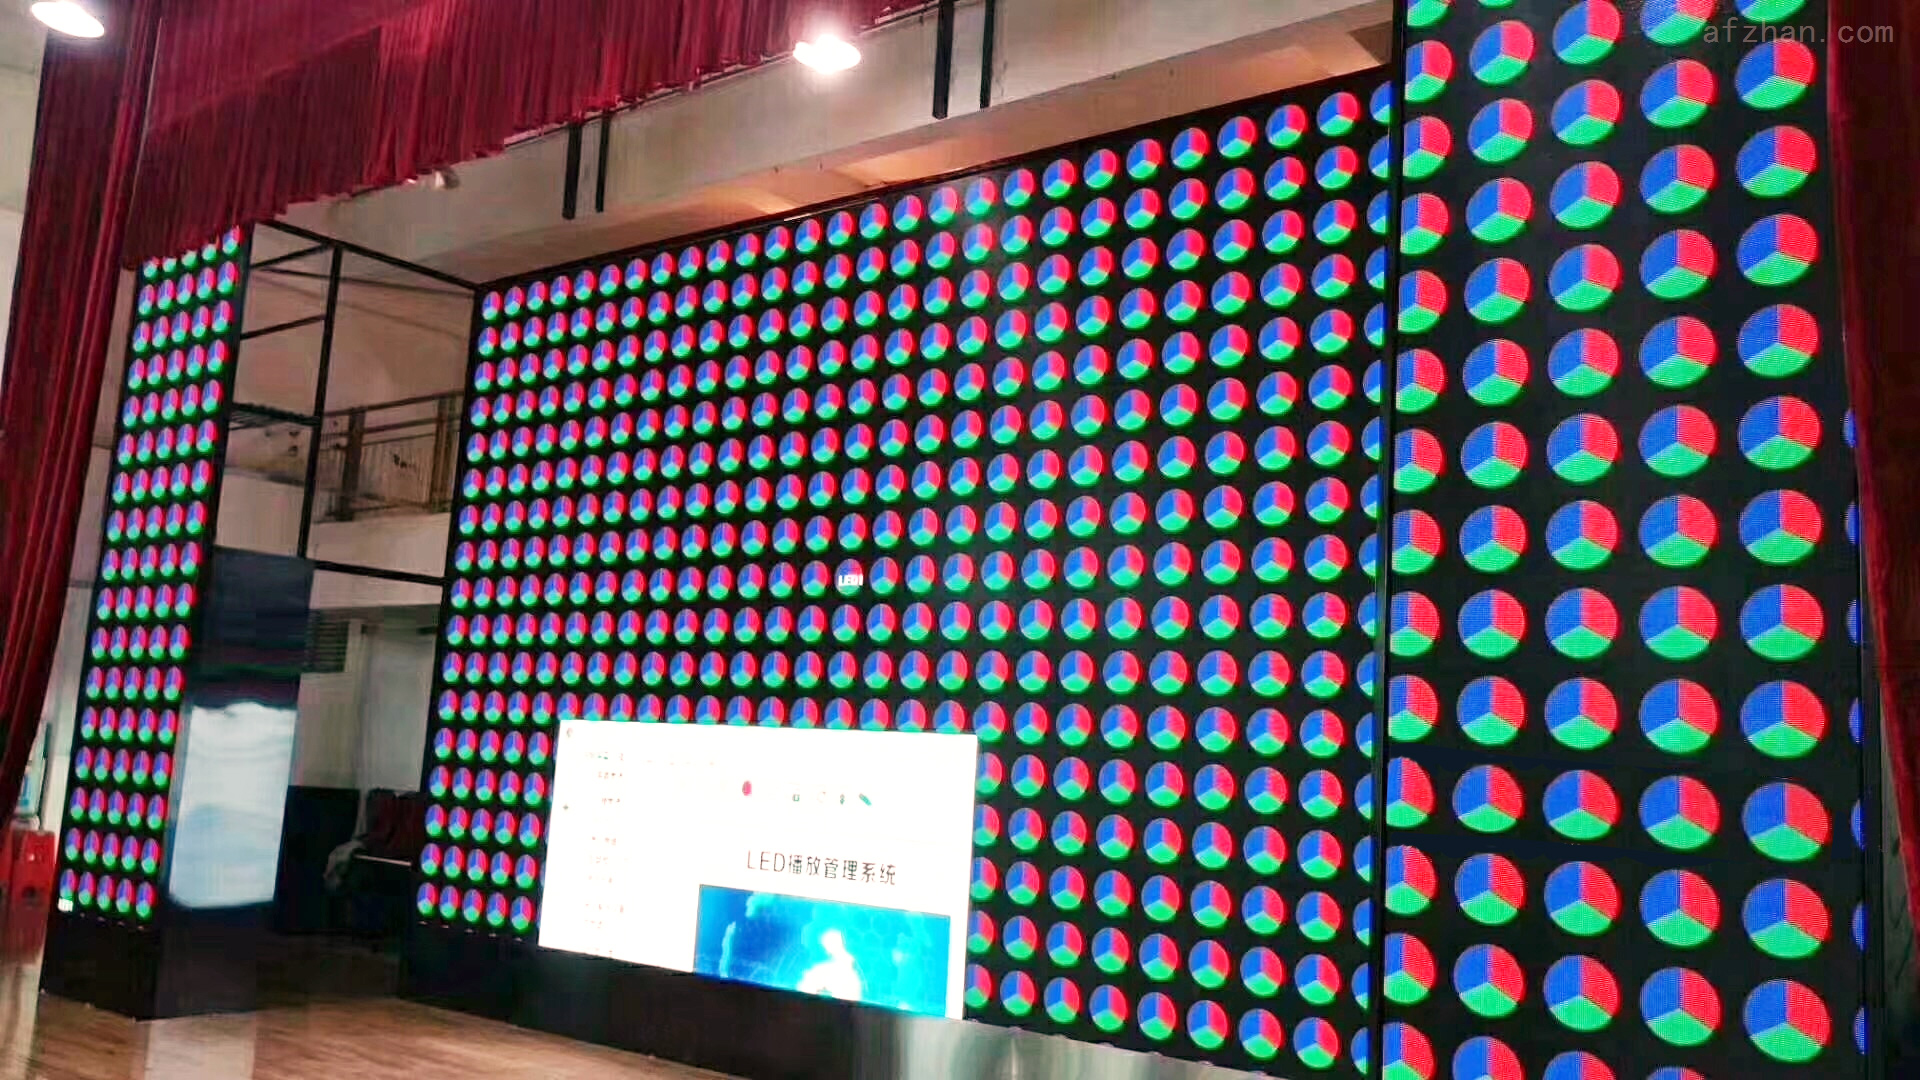 The stage is testing the effect of the stage display